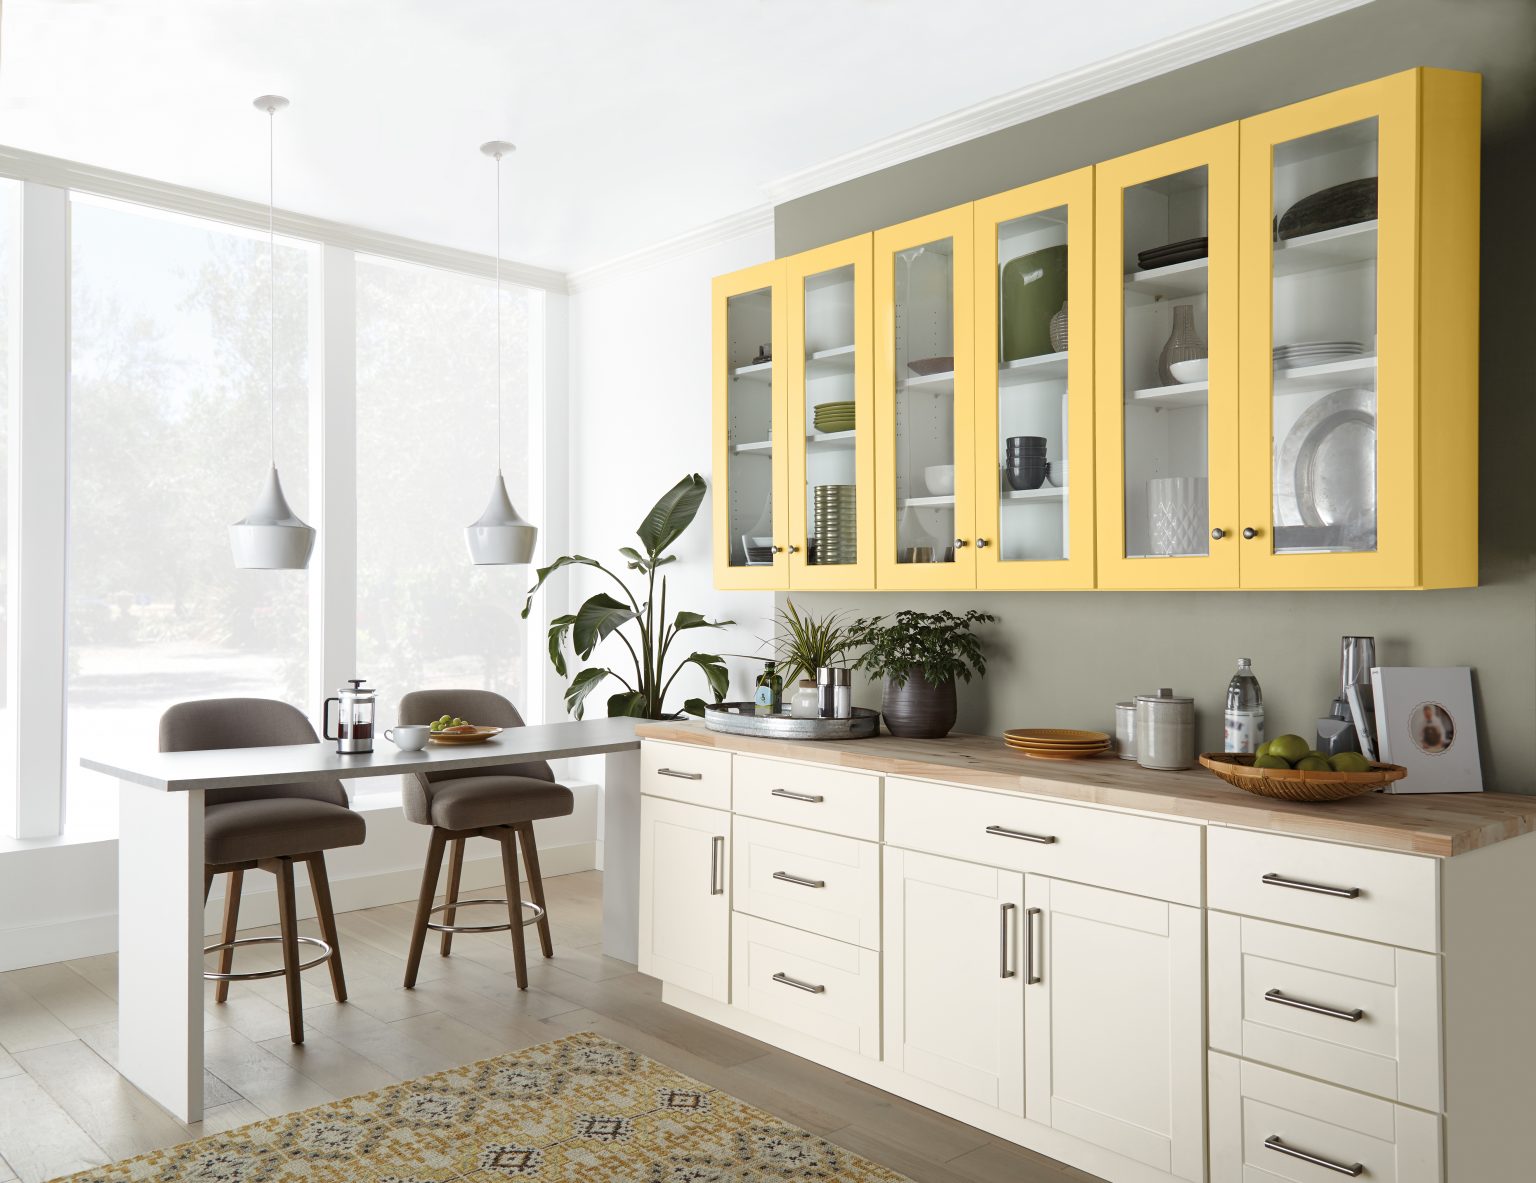 A bright and airy kitchen with cabinets in the colour Spirited Yellow